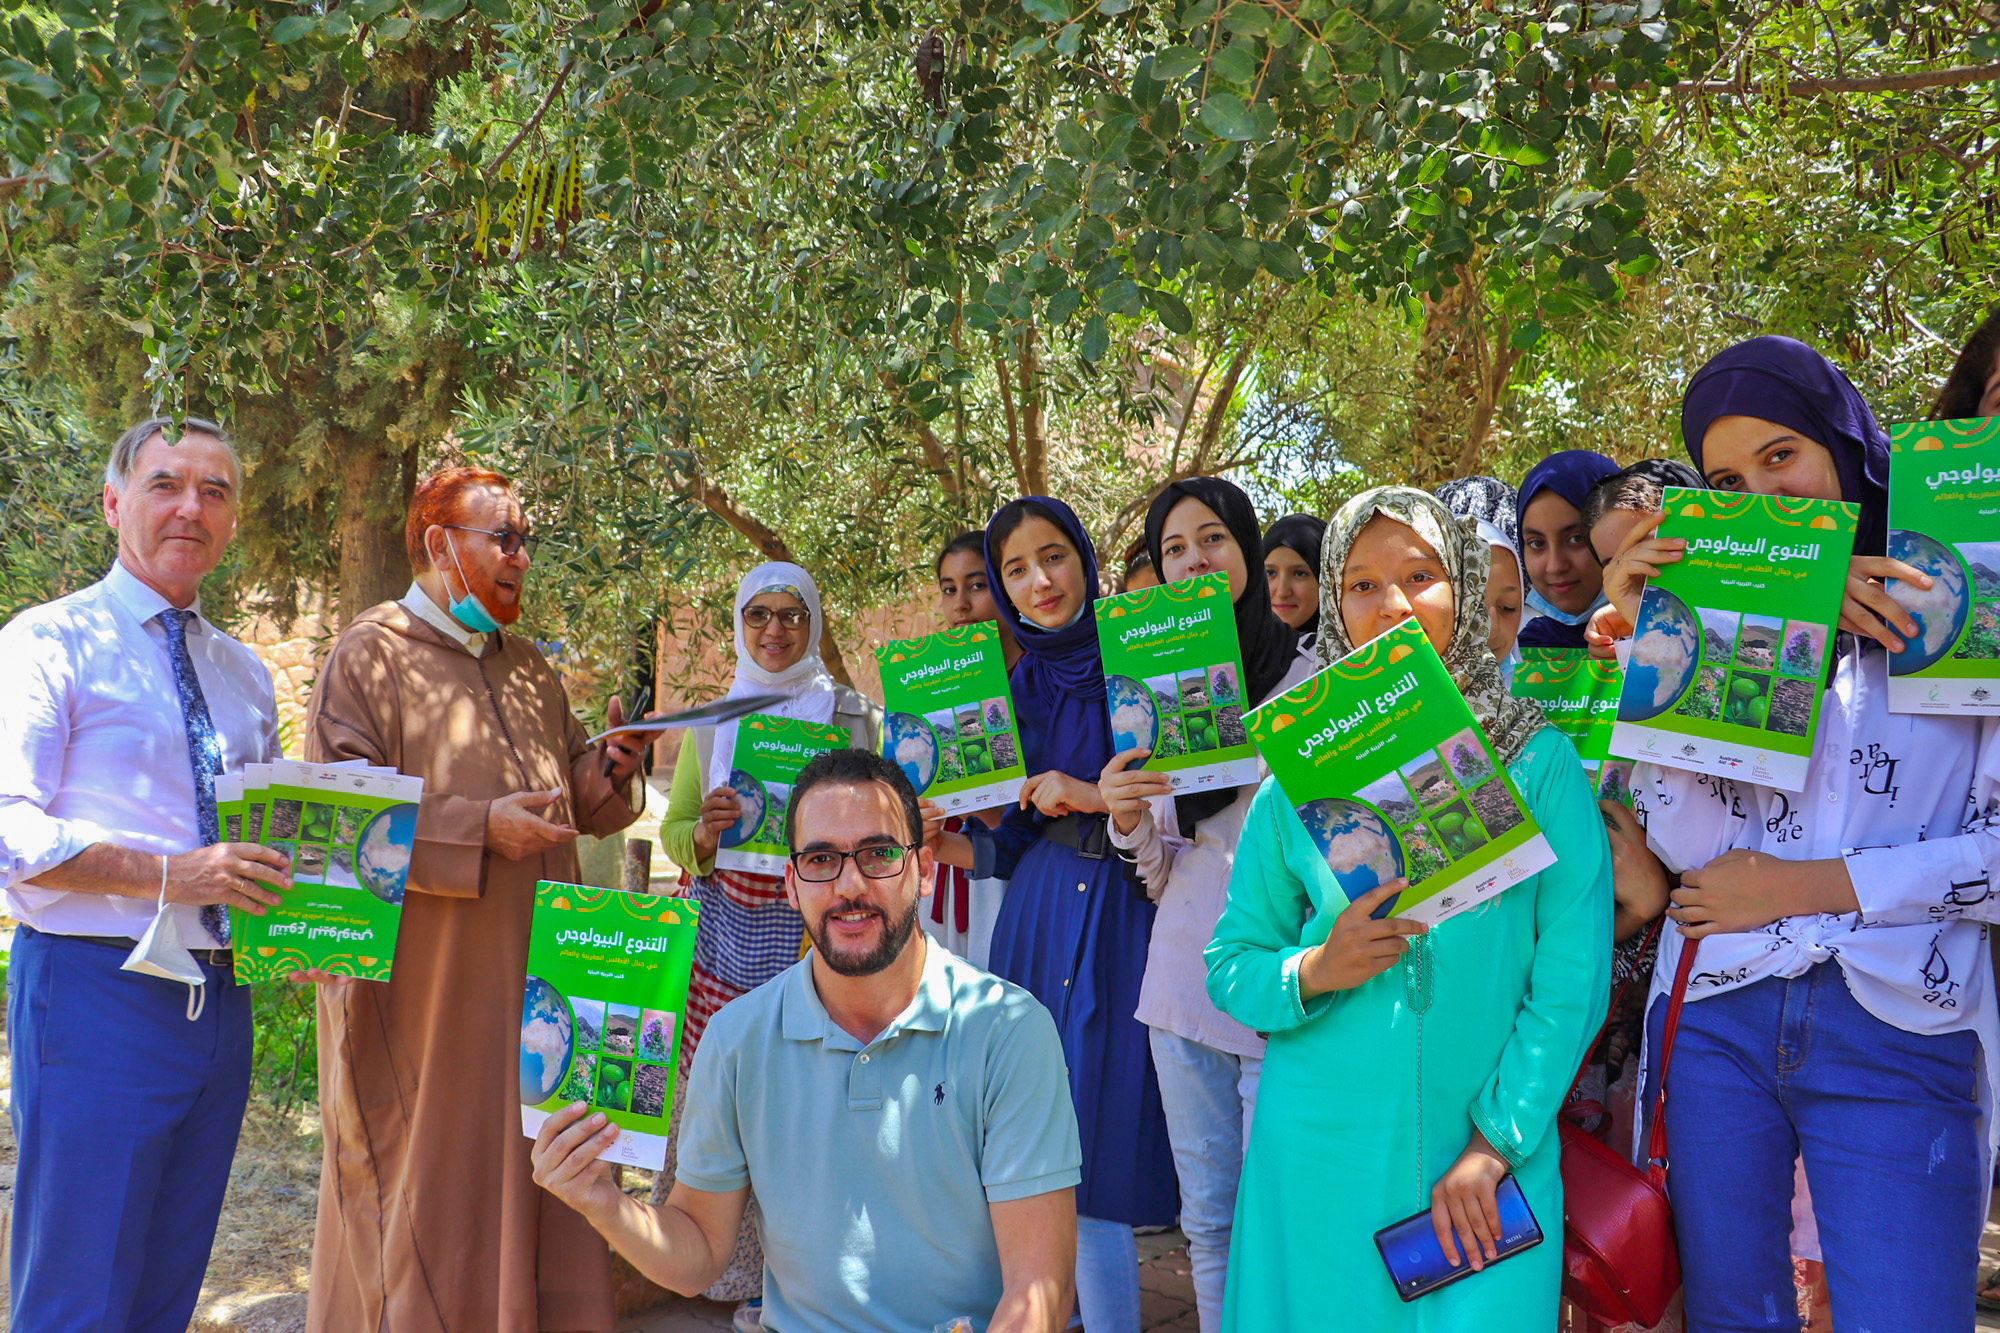 Dar taliba girls receive a new educational resource and a special visitor!